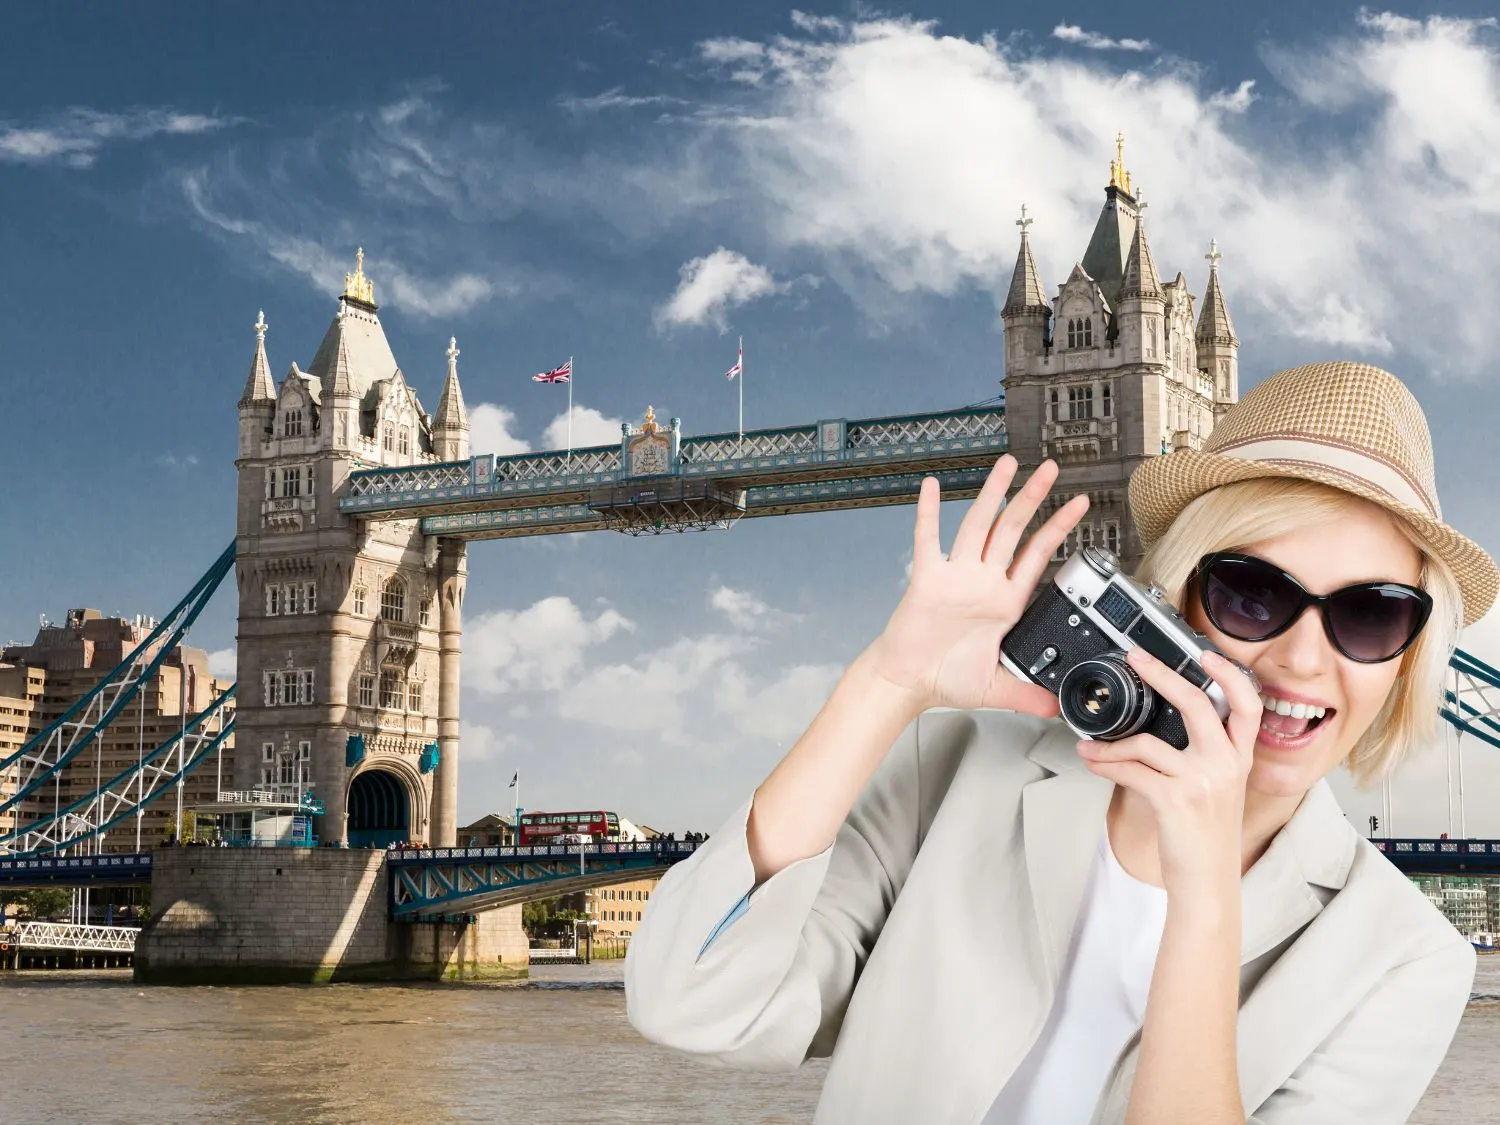 The 6 Best United Kingdom Tours For Unforgettable Adventures That Are Achievable & Affordable!